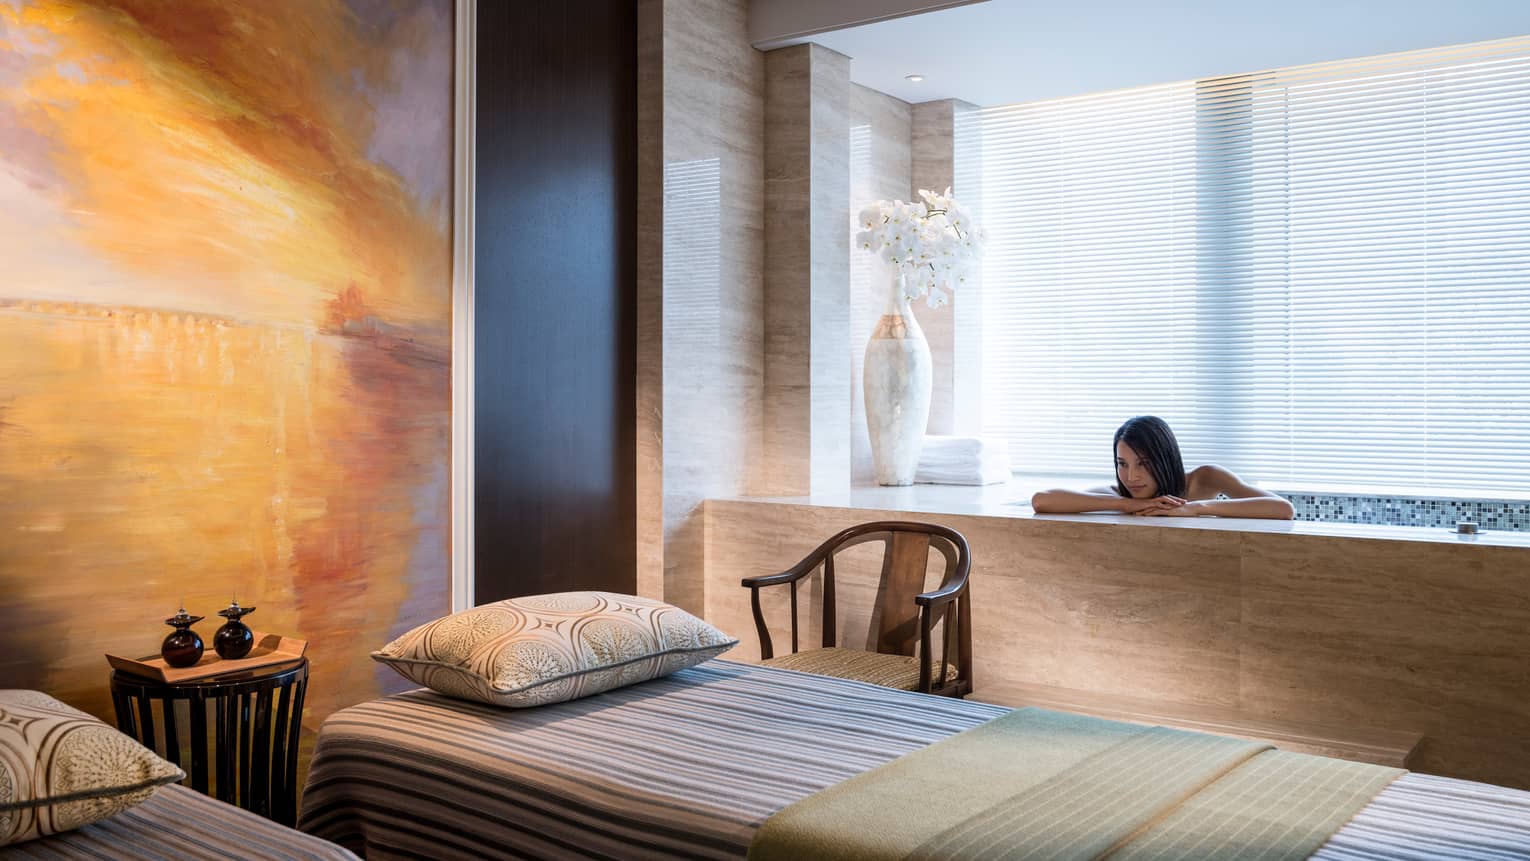 Woman rests head, arms on Spa tub beside massage table